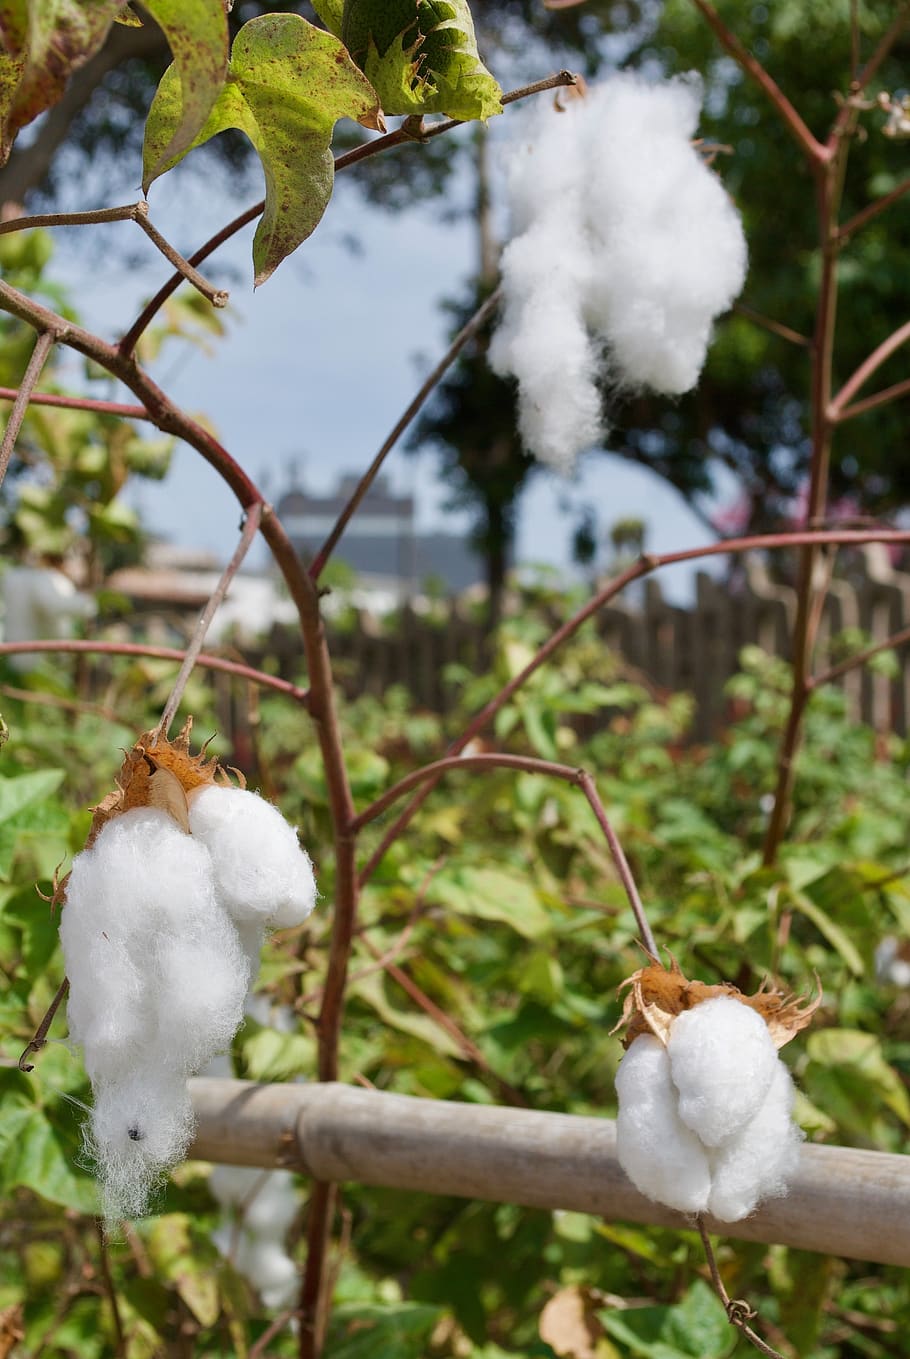 cotton, lima, peru, plant, latin, miraflores, agriculture, focus on foreground, white color, growth